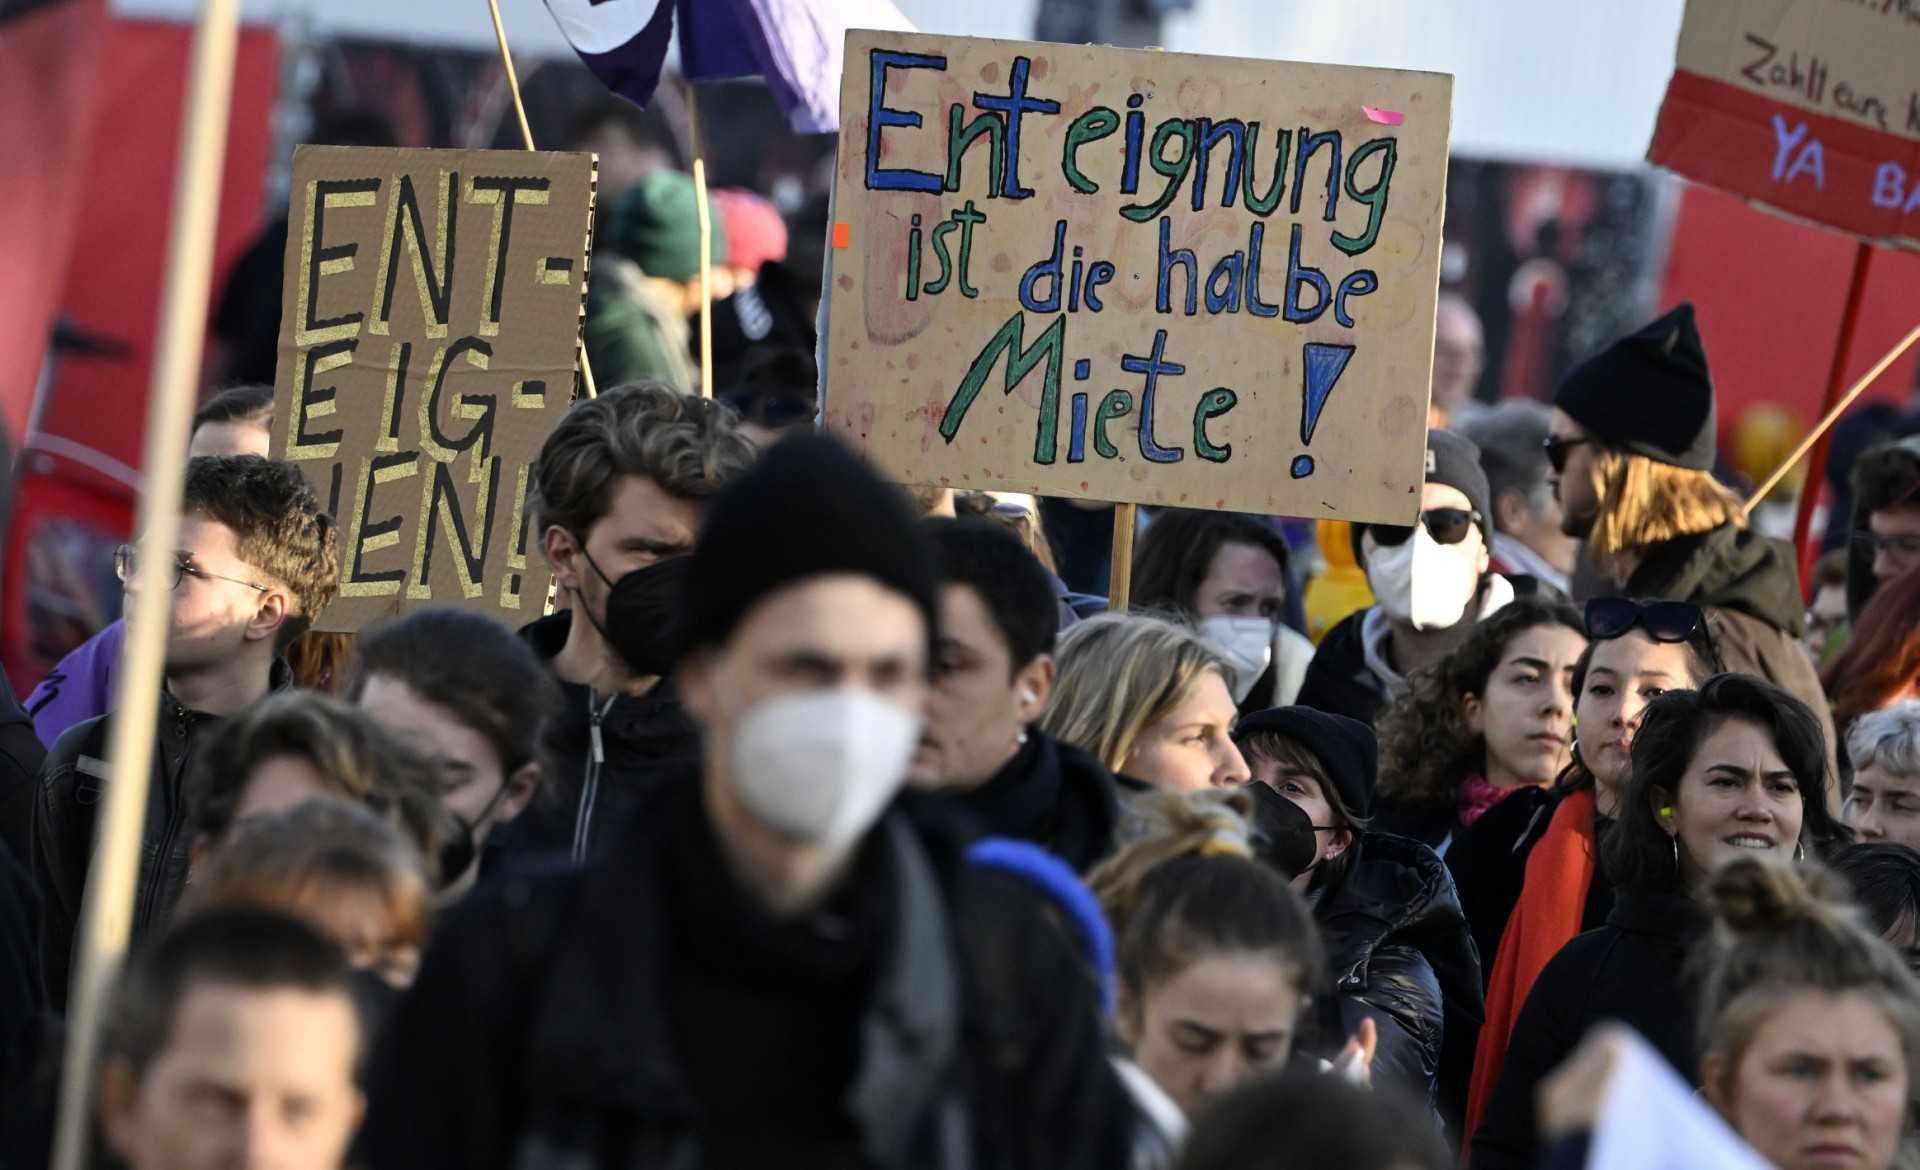 Demonstrators carry posters on Nov 12 in Berlin, in order to protest against expensive rent, rising prices and heating costs that have become unaffordable. Photo: AFP 